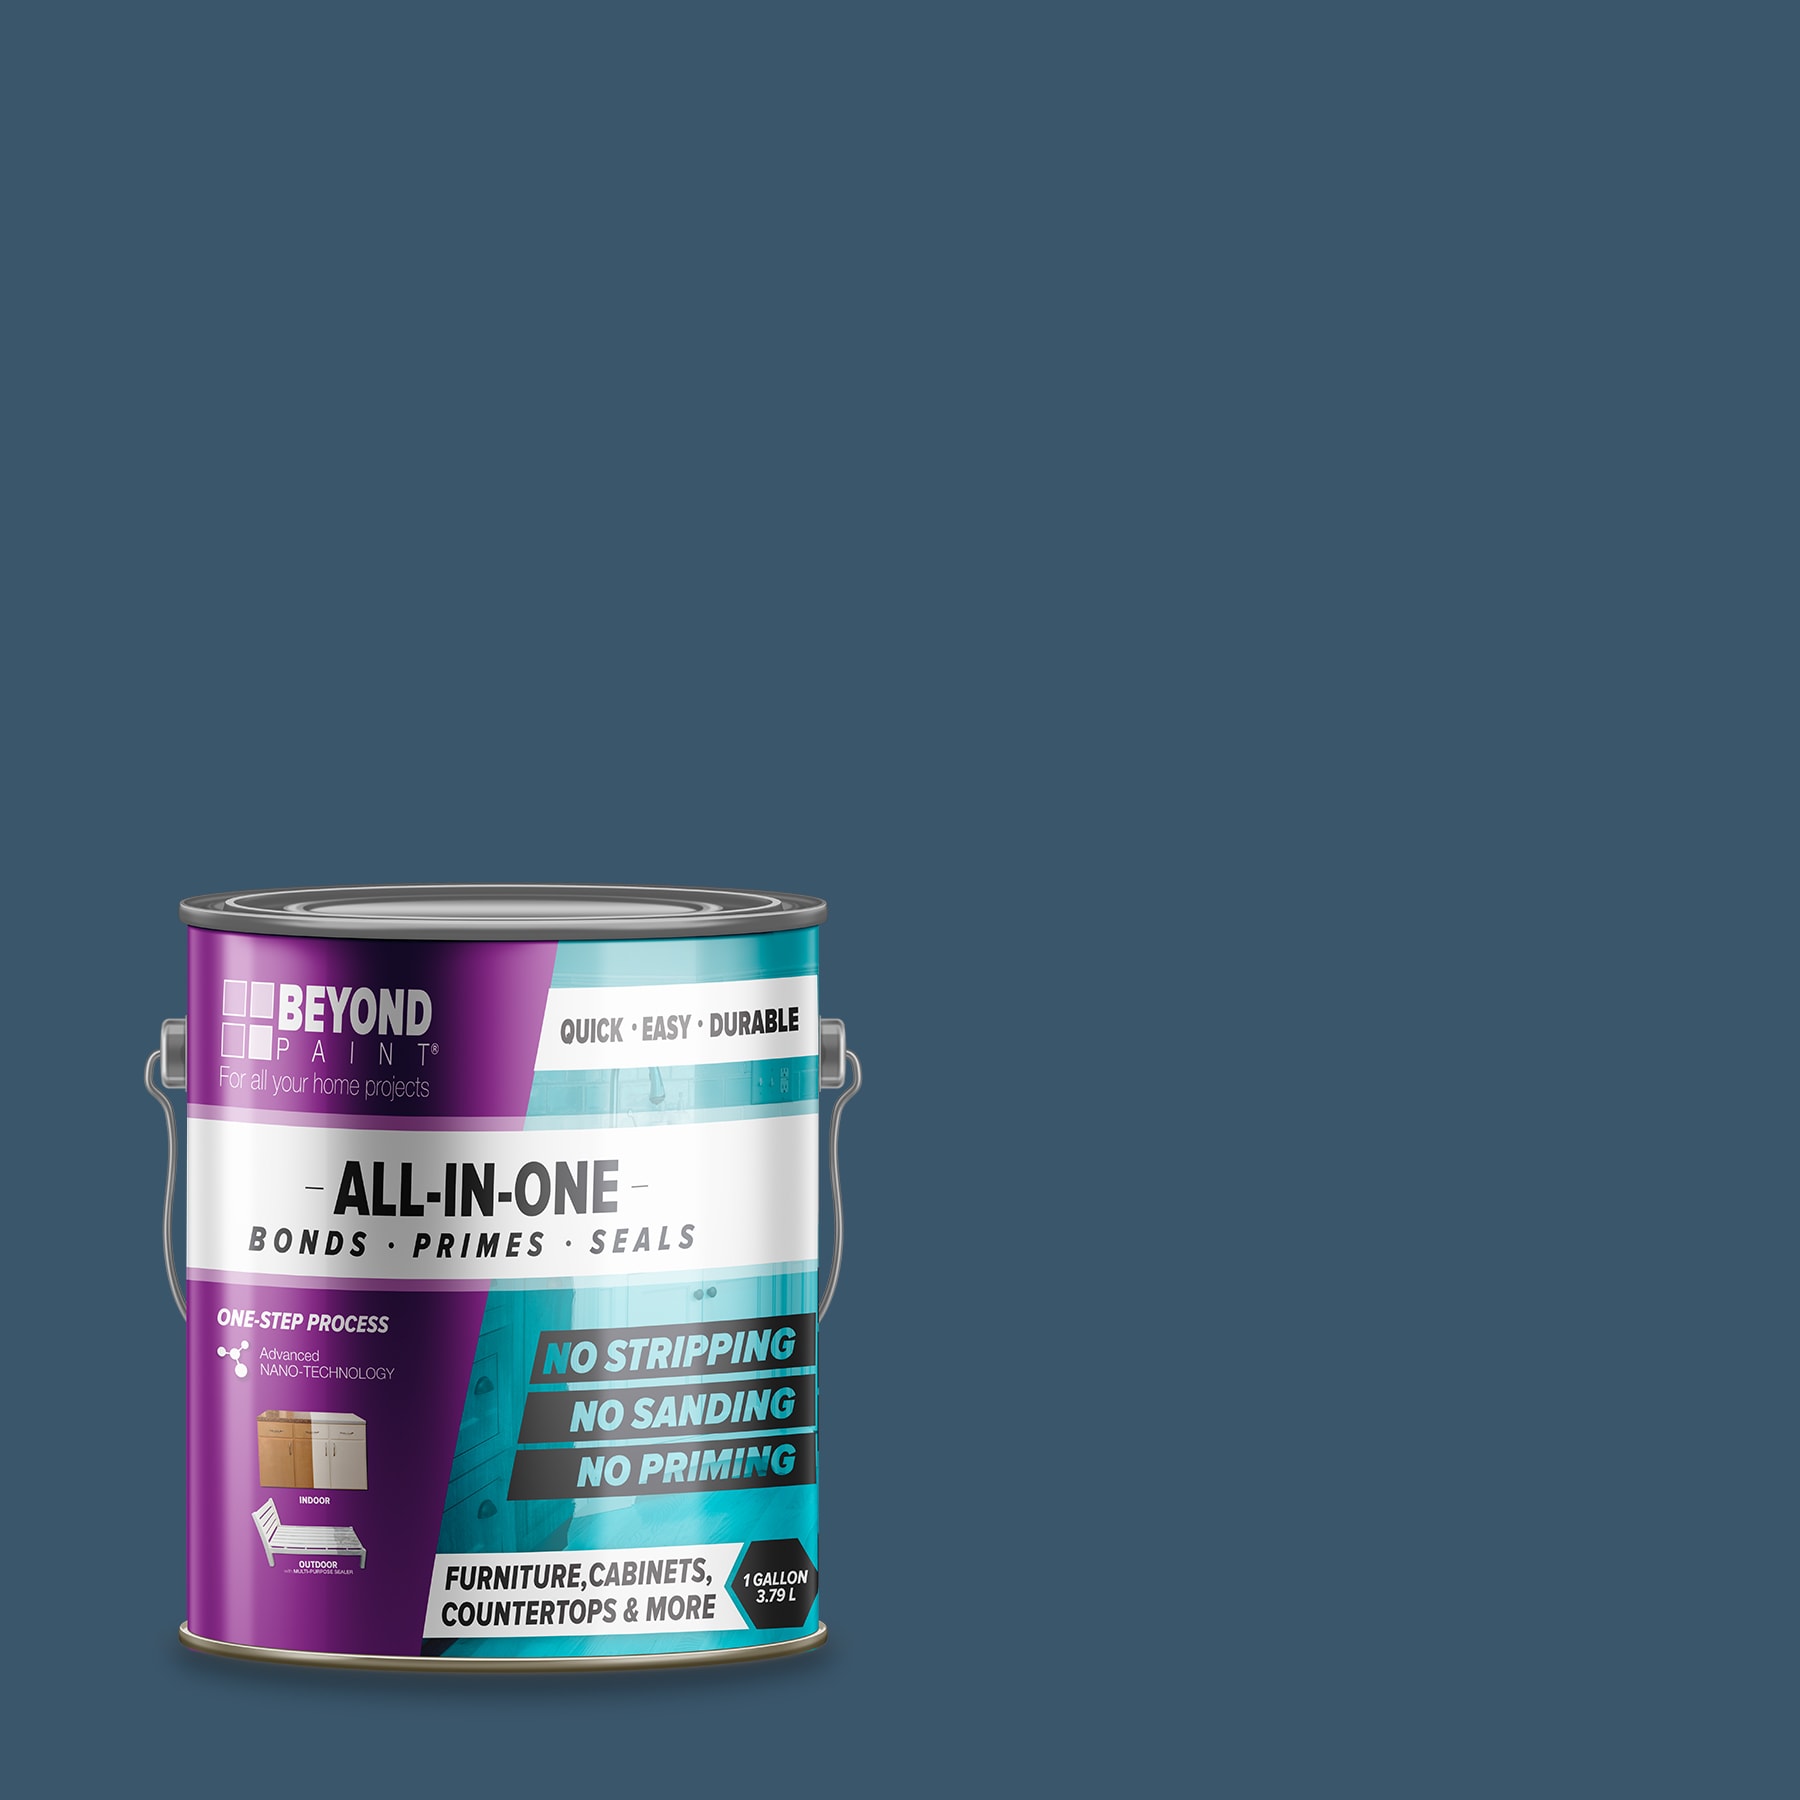 All-In-One Paint, Polo (Dark Navy), 128 fl oz Gallon. Durable Cabinet and Furniture Paint. Built in Primer and Top Coat, No Sanding Needed.